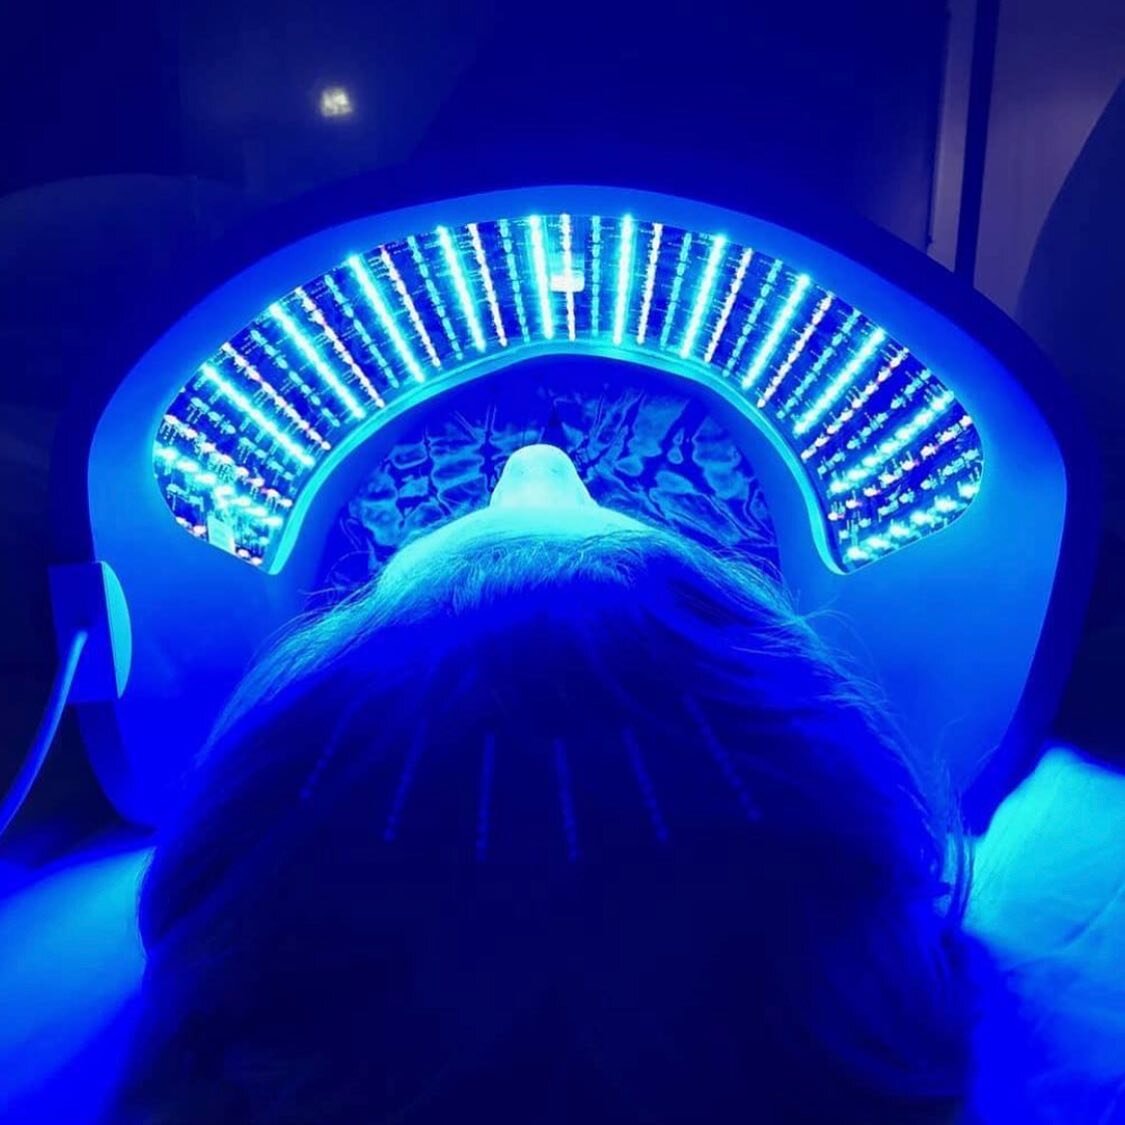 What is LED? Light Emitting Diodes are an effective form of low level light therapy used to treat a variety of concerns such as acne, wrinkles, and pain. It is a pain-free, non-invasive, non-toxic and rejuvenating treatment for your body at a cellula